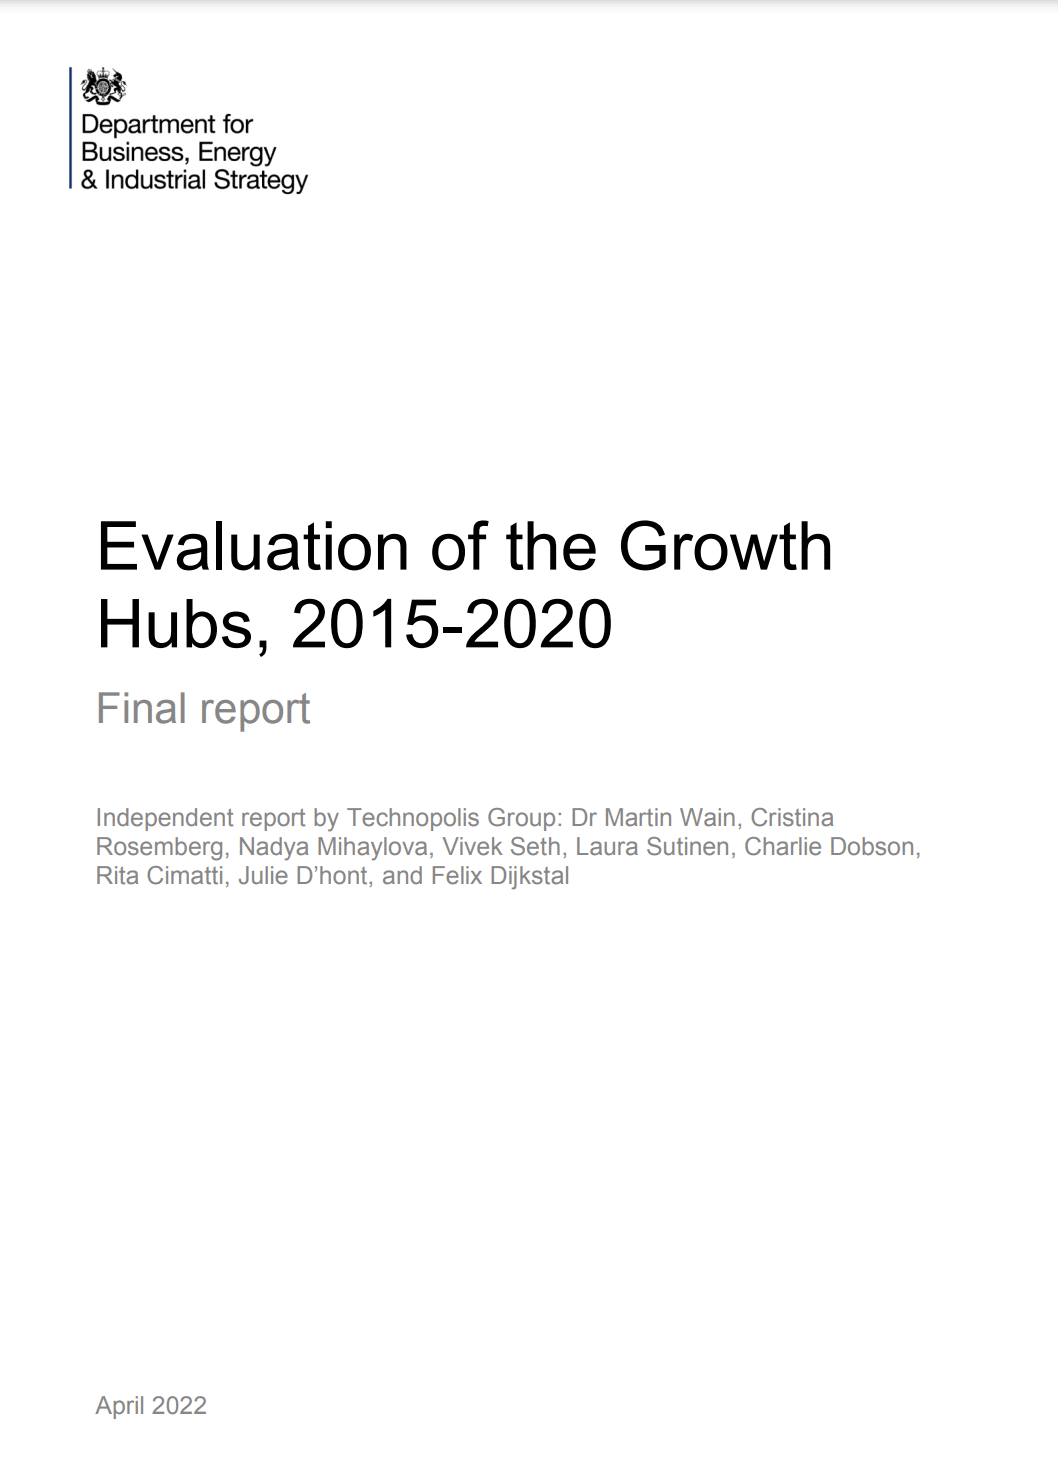 Evaluation of the Growth Hubs, 2015-2020